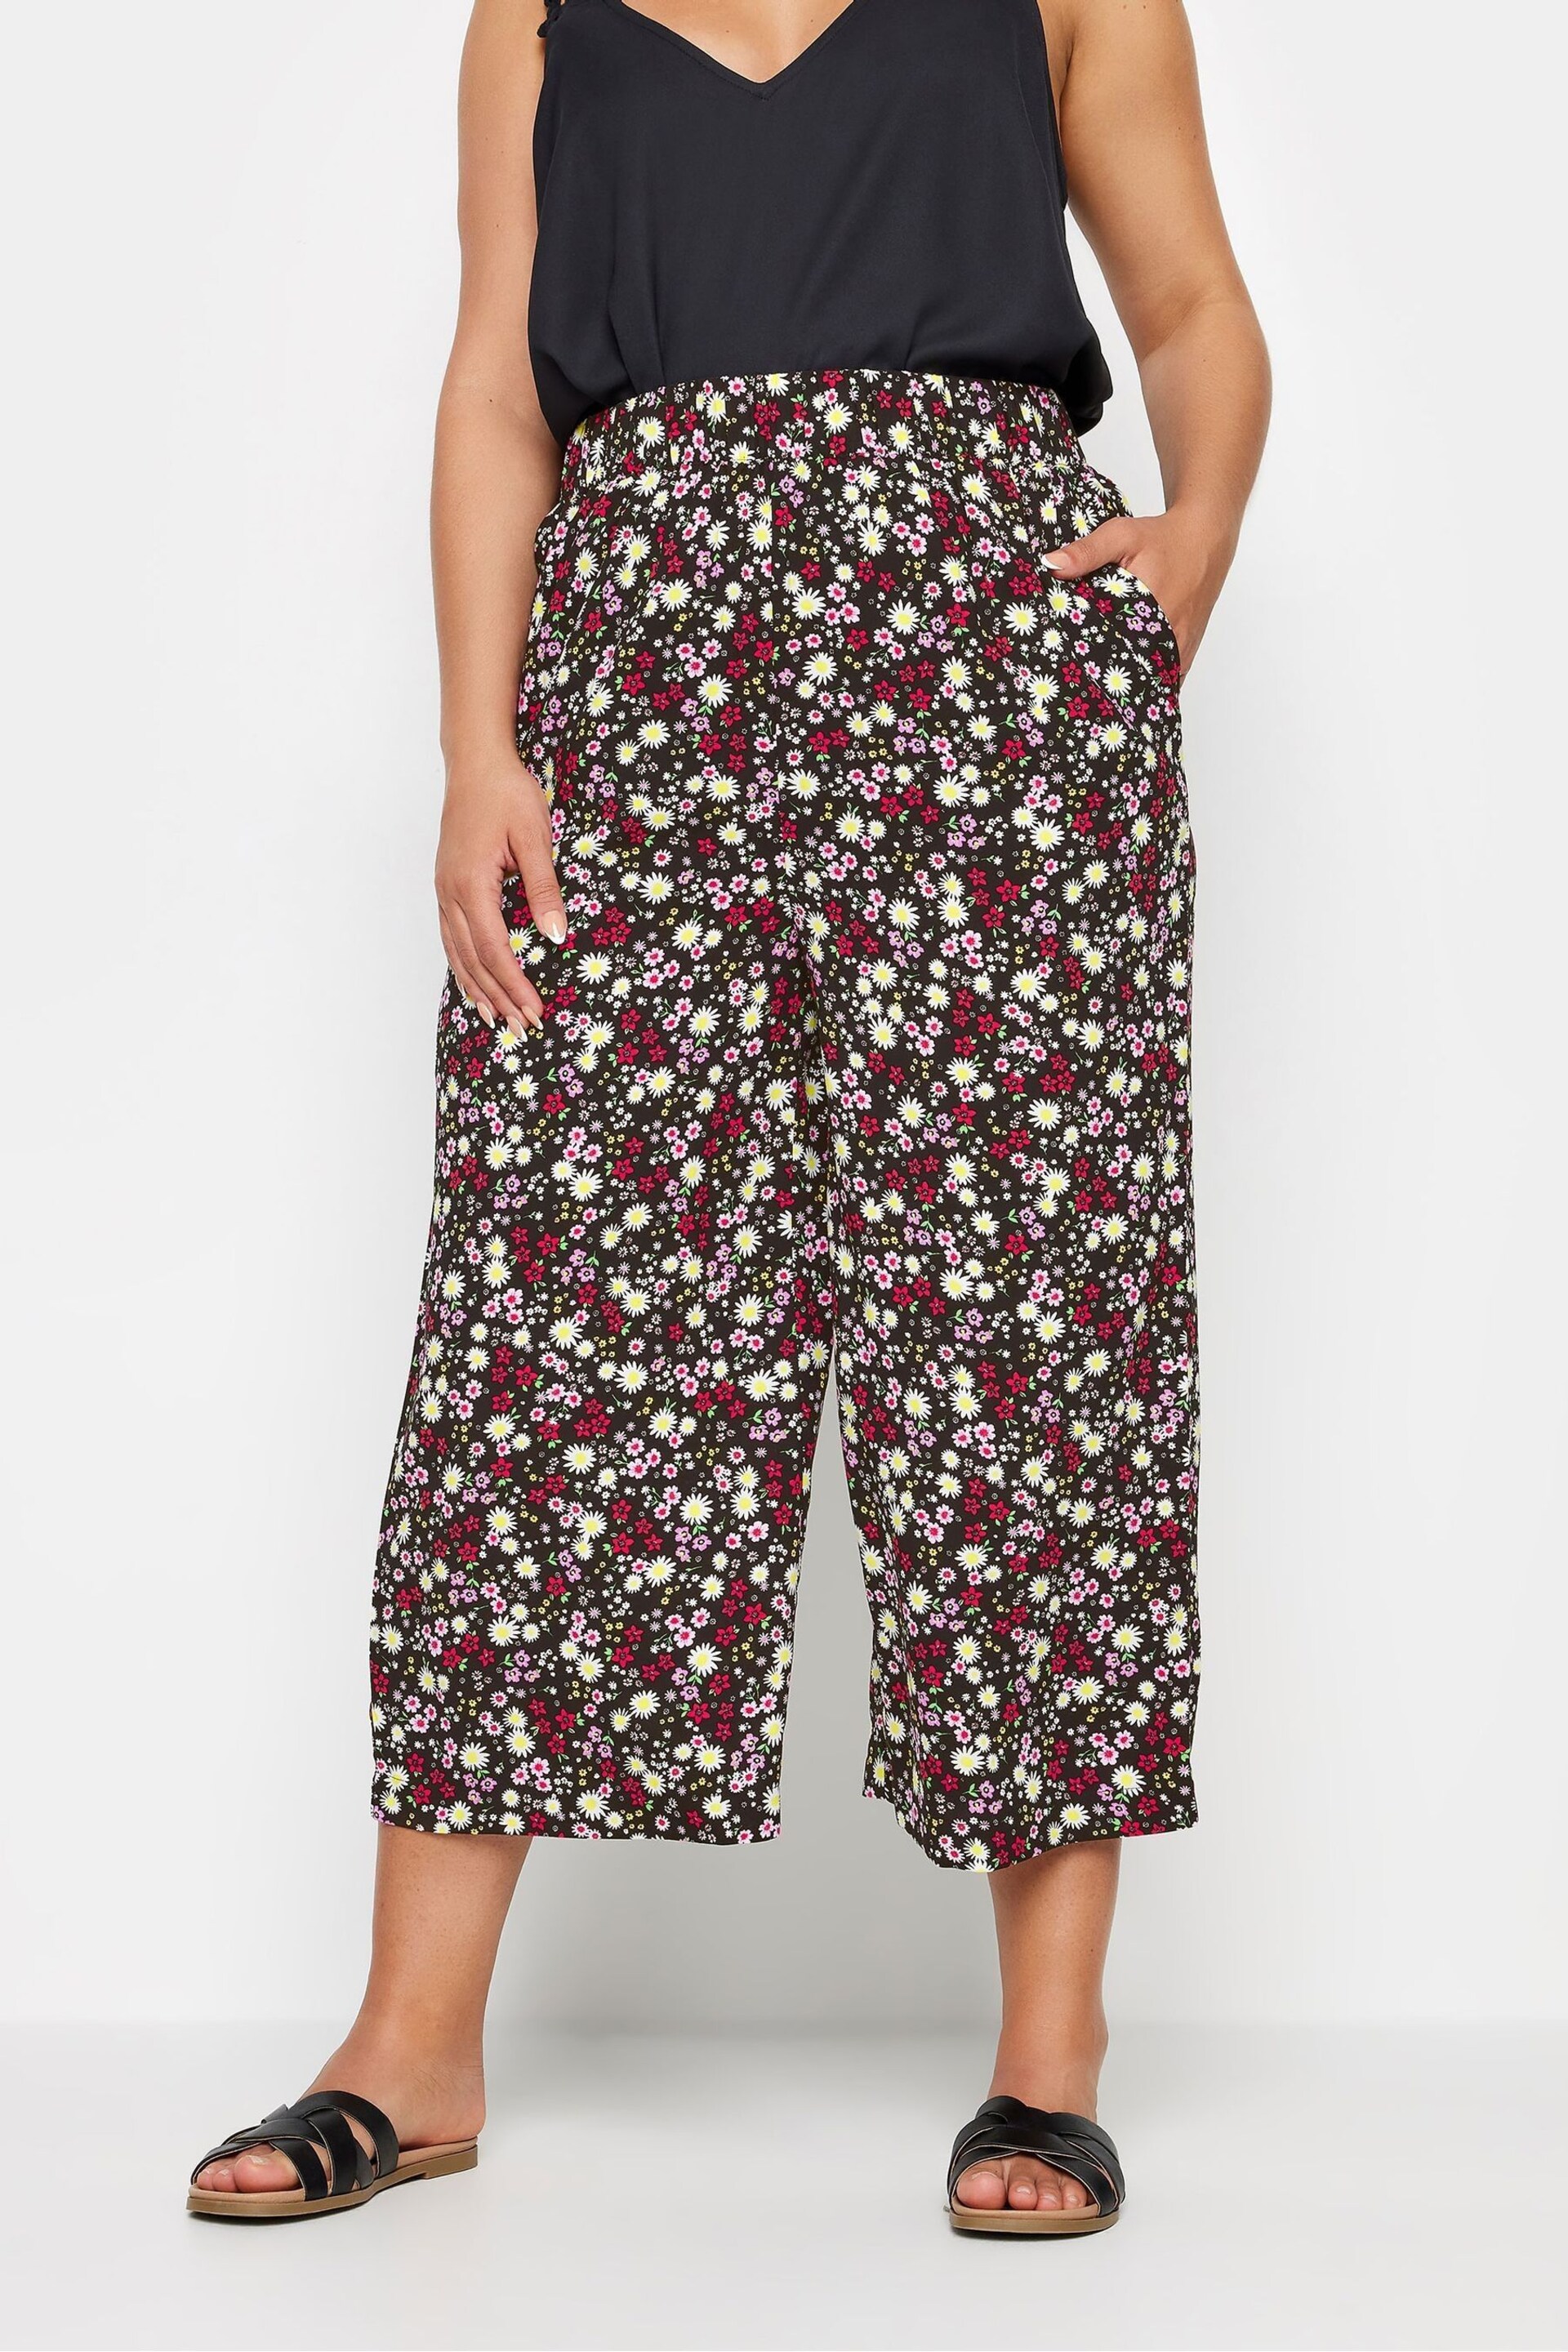 Yours Curve Black Ditsy Floral Print Wide Leg Cropped Trousers - Image 1 of 5